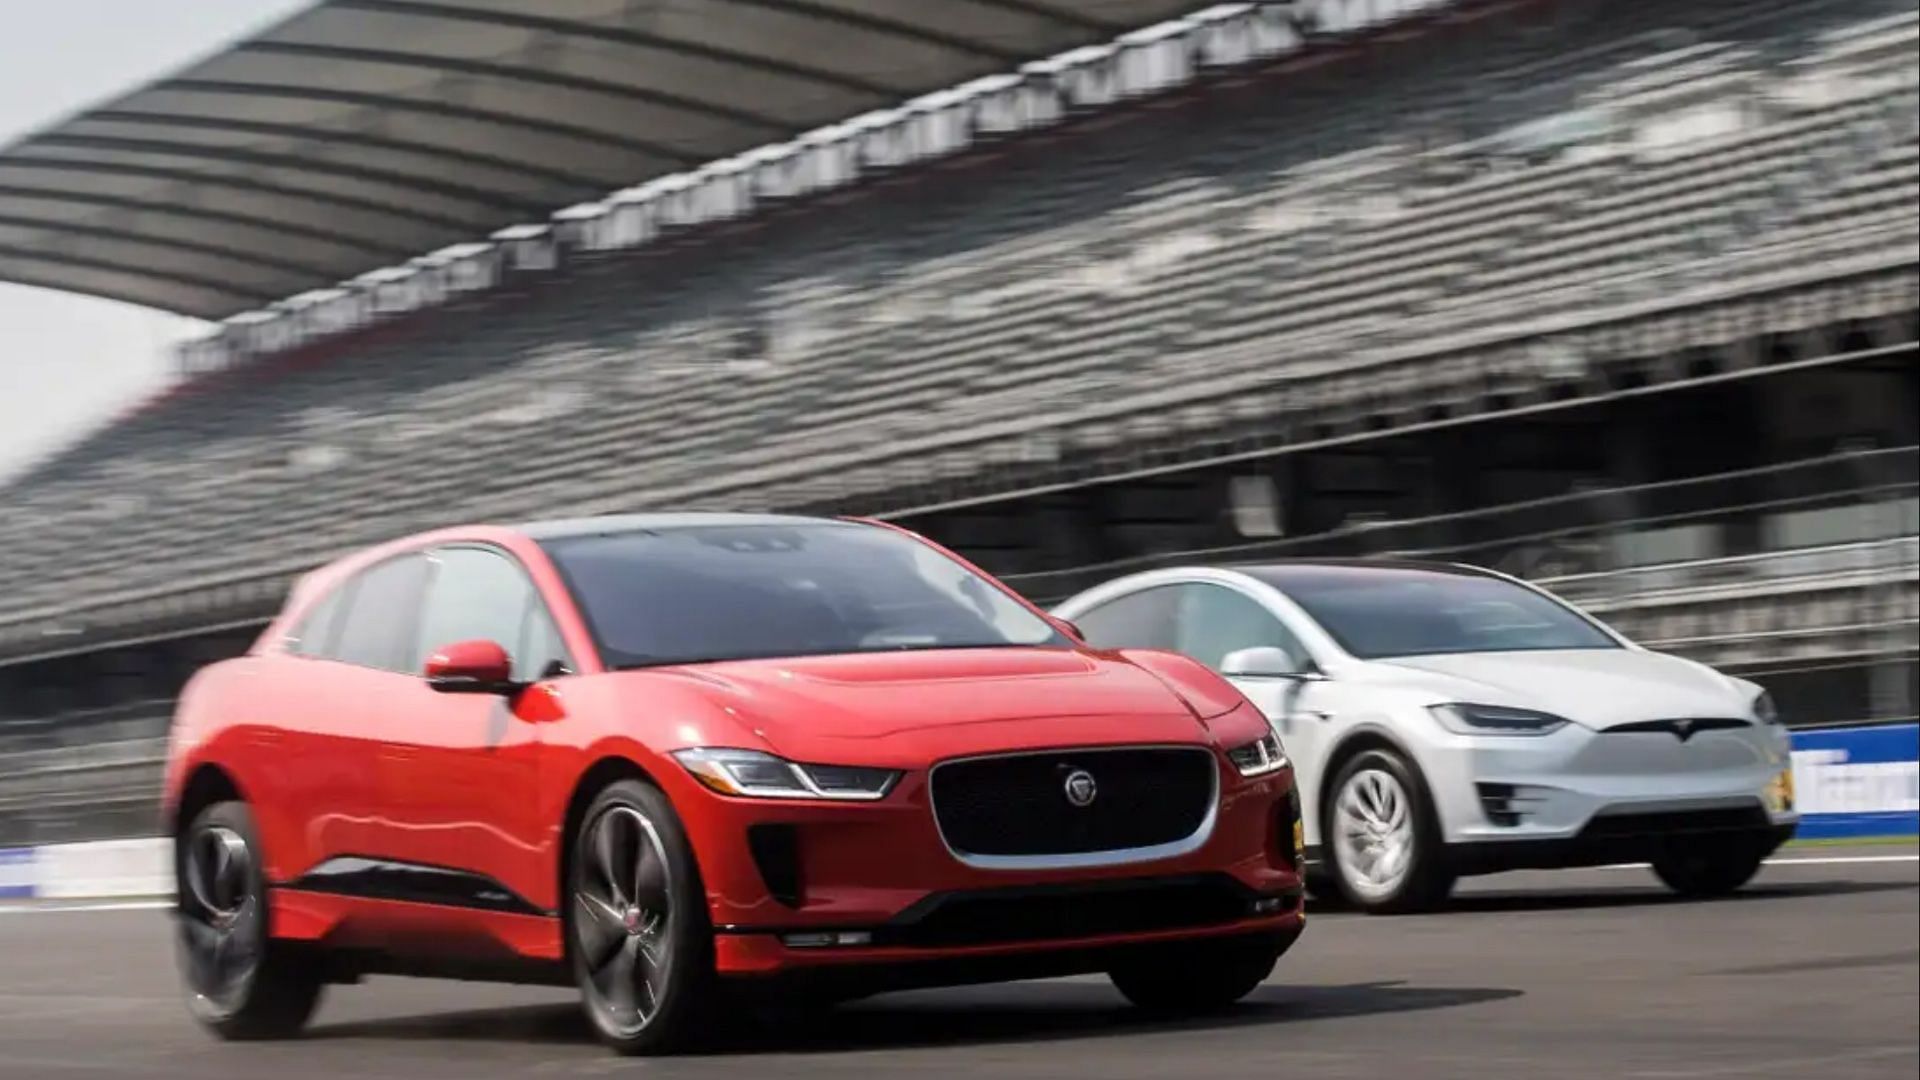 The high-voltage batteries on the recalled I-PACE electric vehicles may overheat posing fire risks (Image via Jaguar)